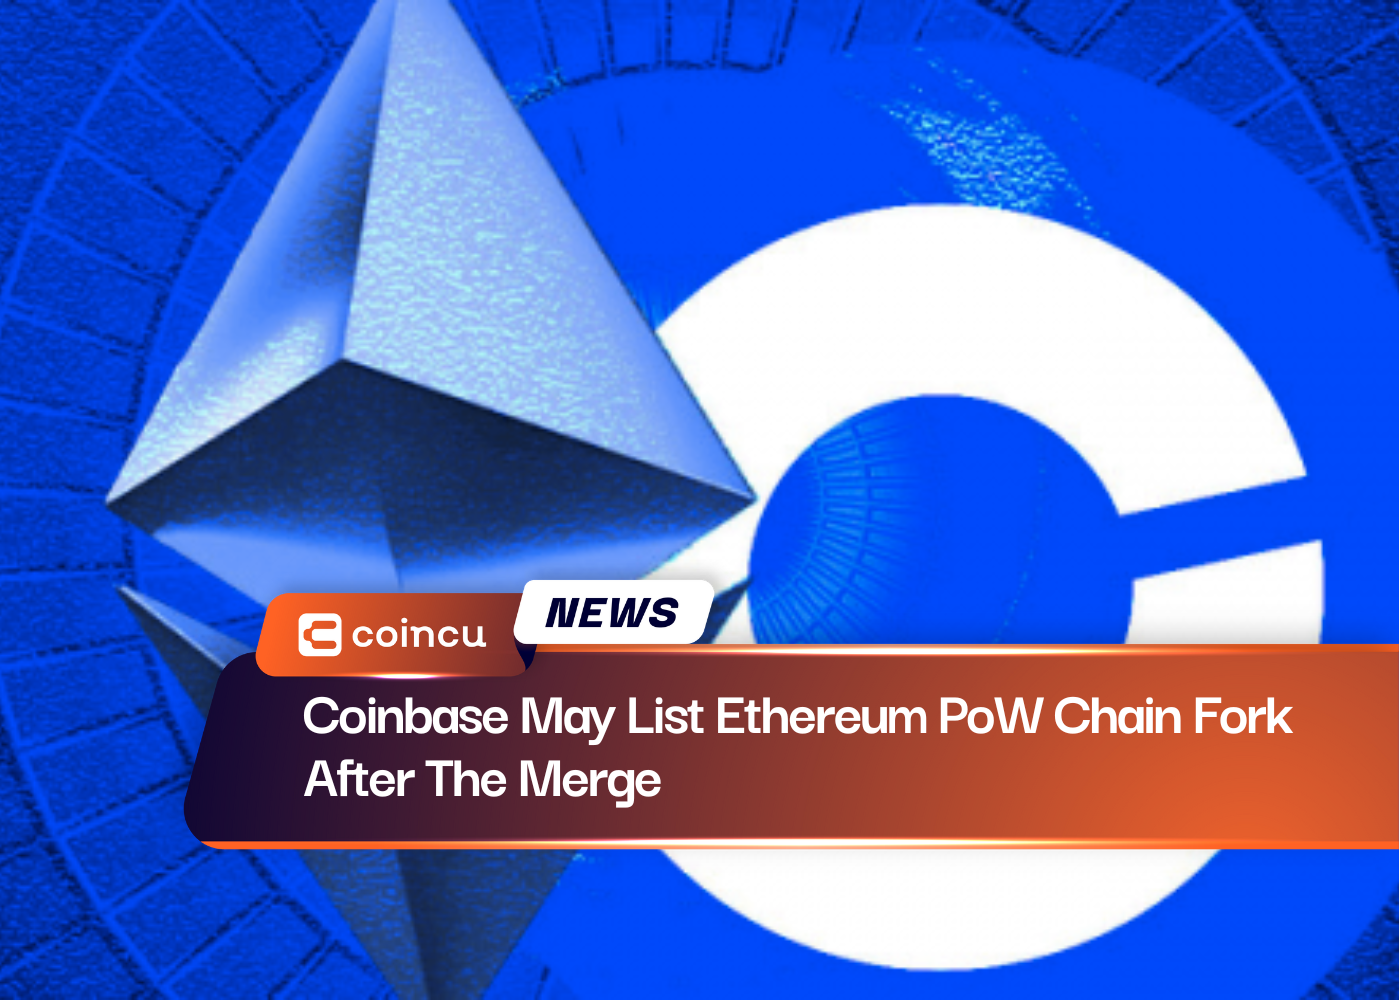 Coinbase May List Ethereum PoW Chain Fork After The Merge